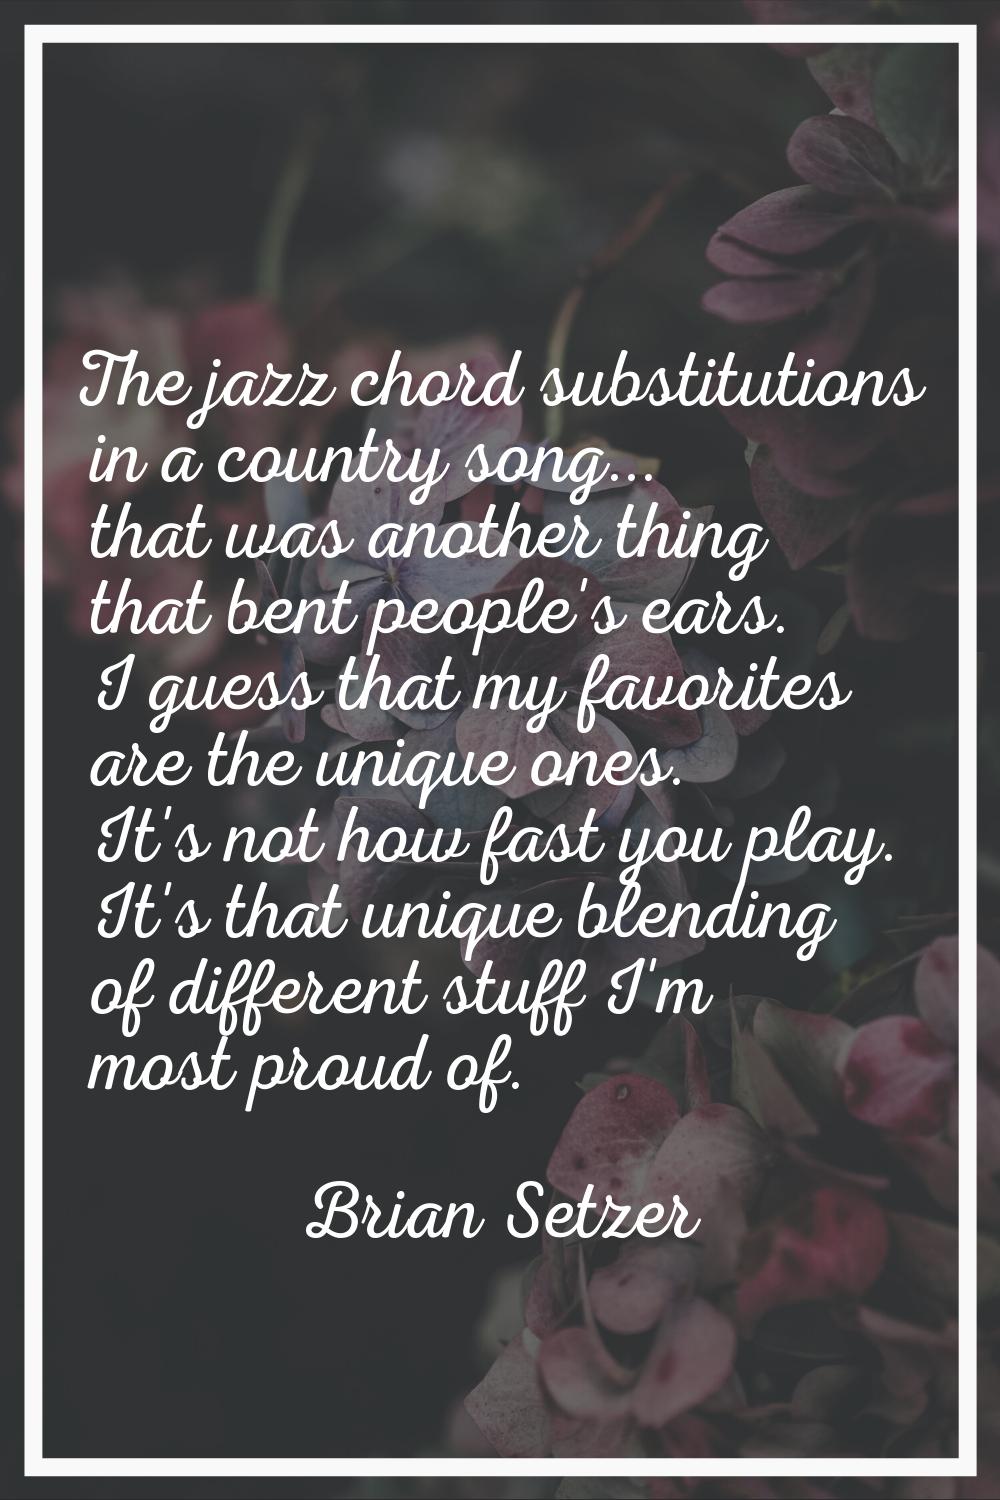 The jazz chord substitutions in a country song... that was another thing that bent people's ears. I